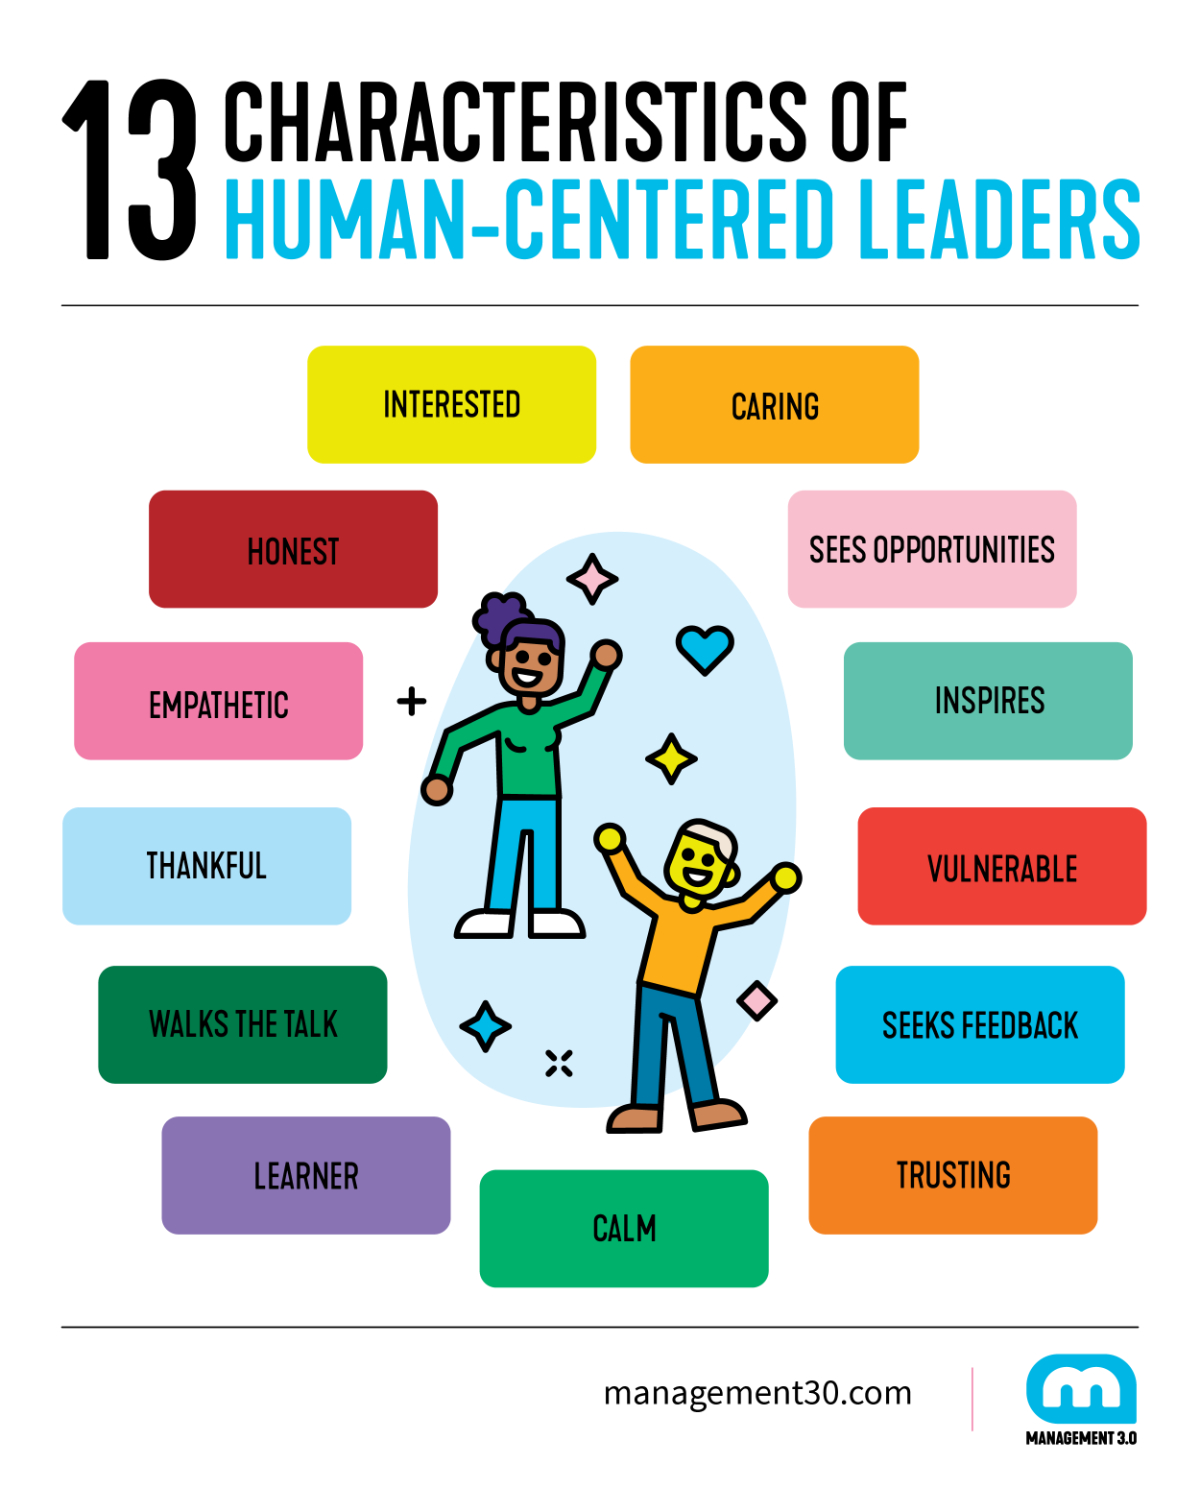 Characteristics of Human-Centered Leaders